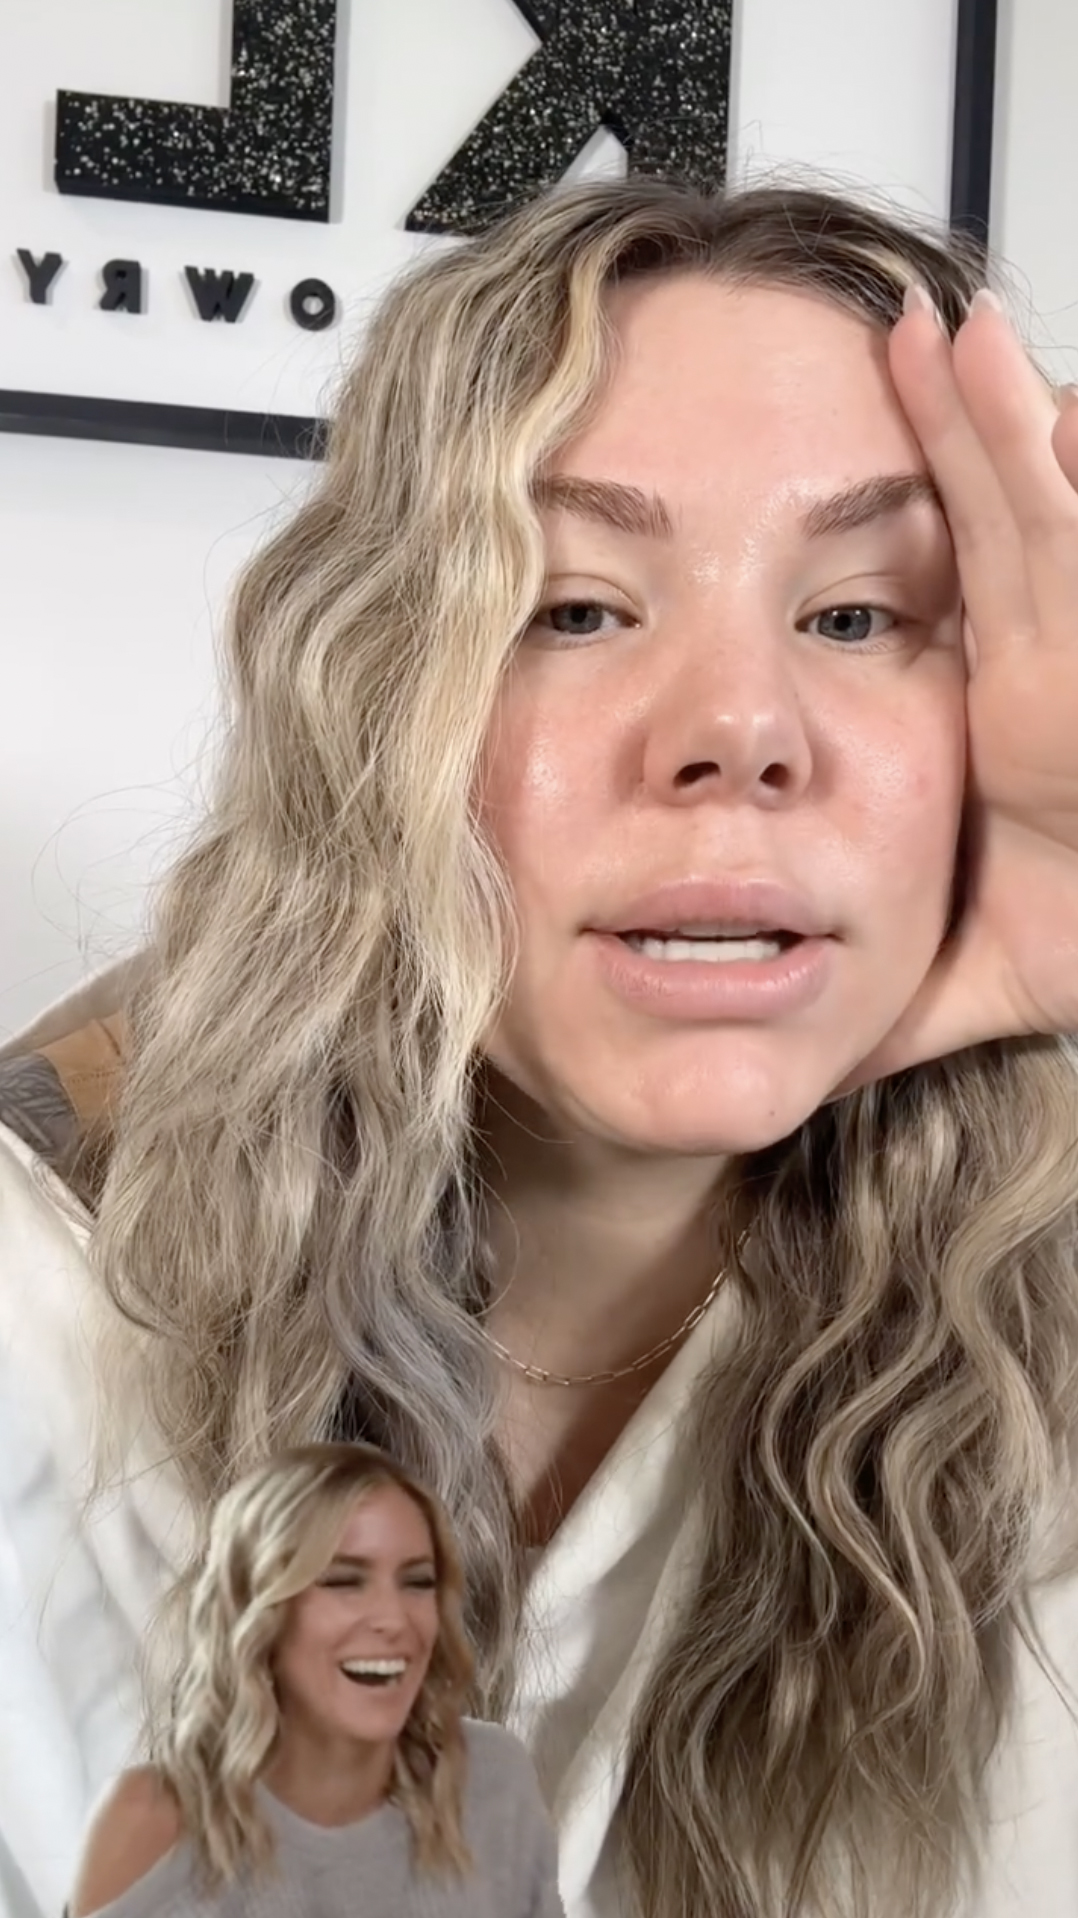 Kailyn admitted, 'Elijah and I are struggling right now'